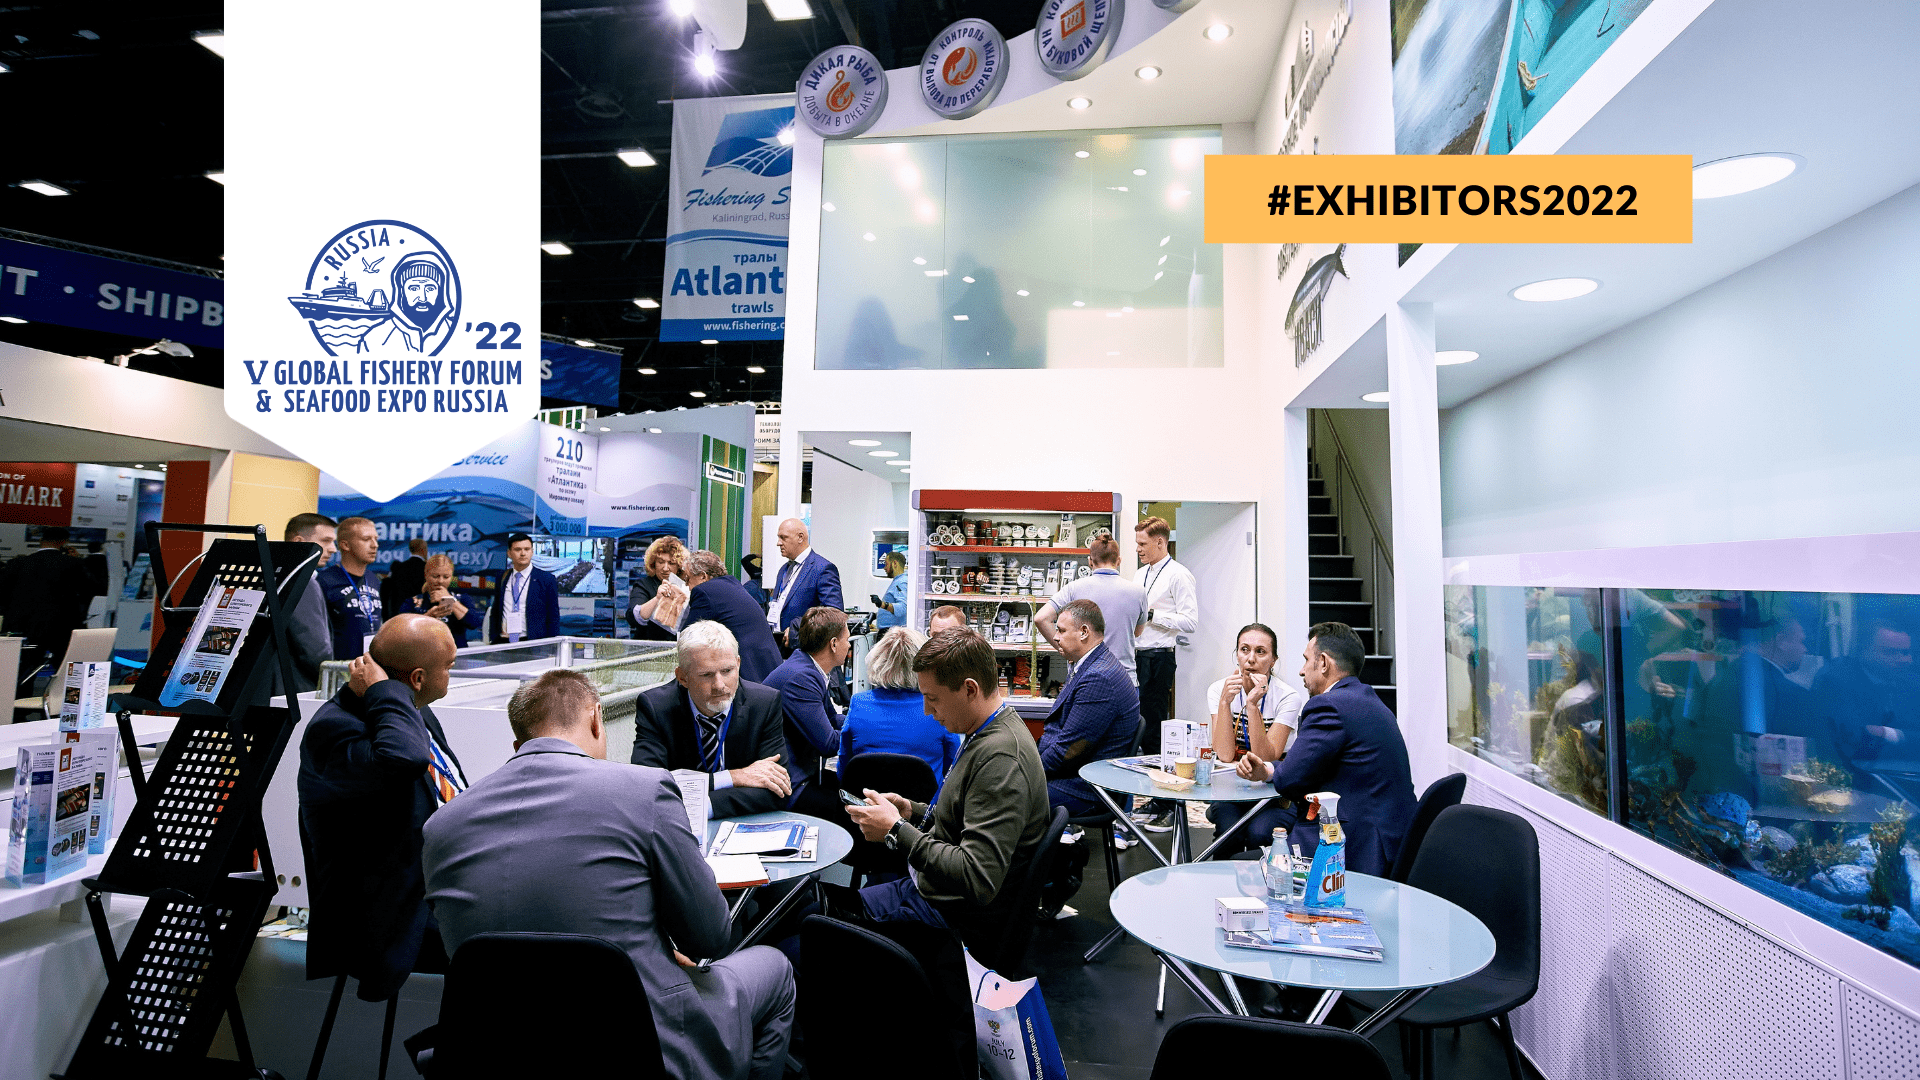 Seafood Expo Russia 2022: Overview of New Exhibitors No. 13